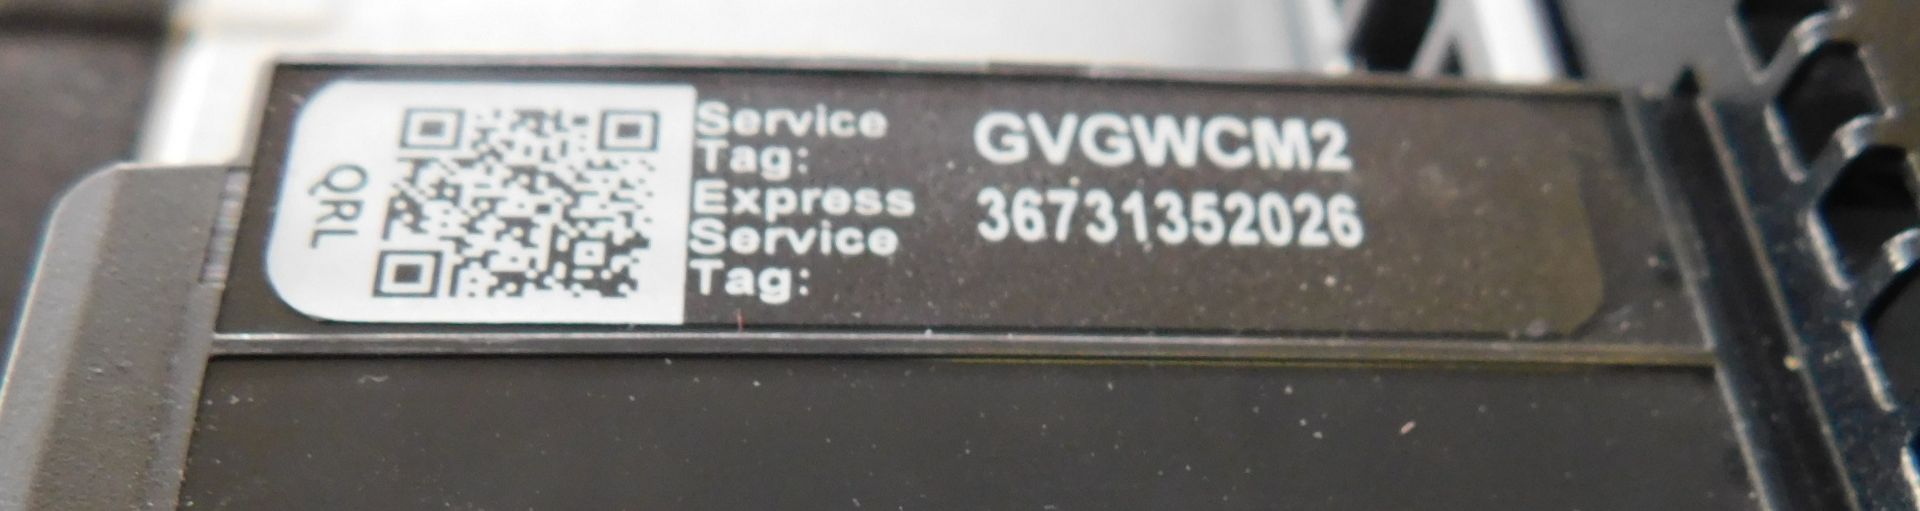 Dell PowerEdge R330 Rack Mounting Server, Service Tag GVGWCM2 (No HDD) (Location Stockport. Please - Image 3 of 3